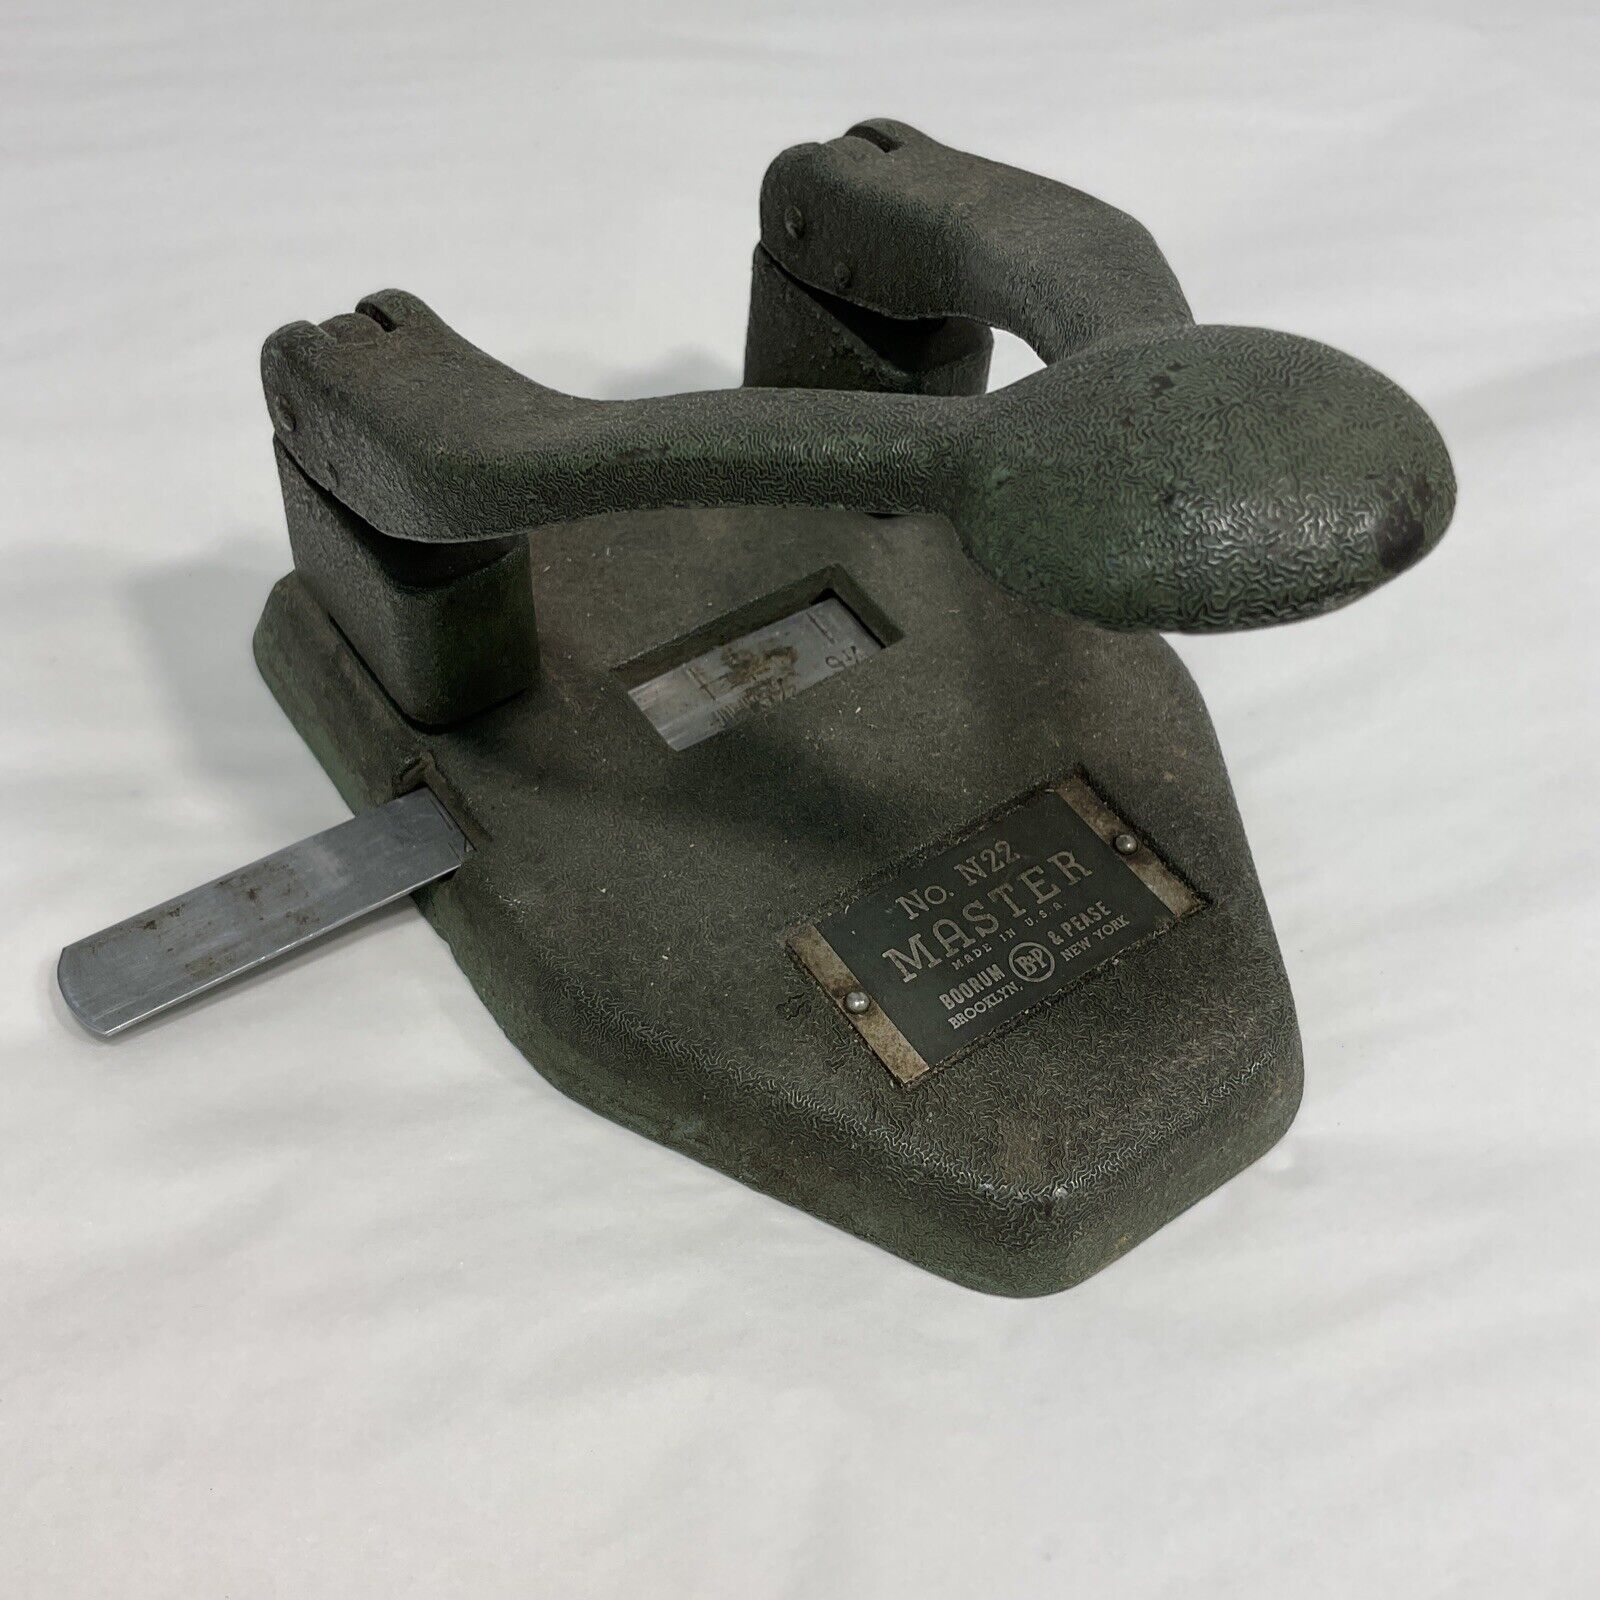 Vintage Metal Paper Hole Punch Puncher: No. 22 Master Boorum & Pease New York